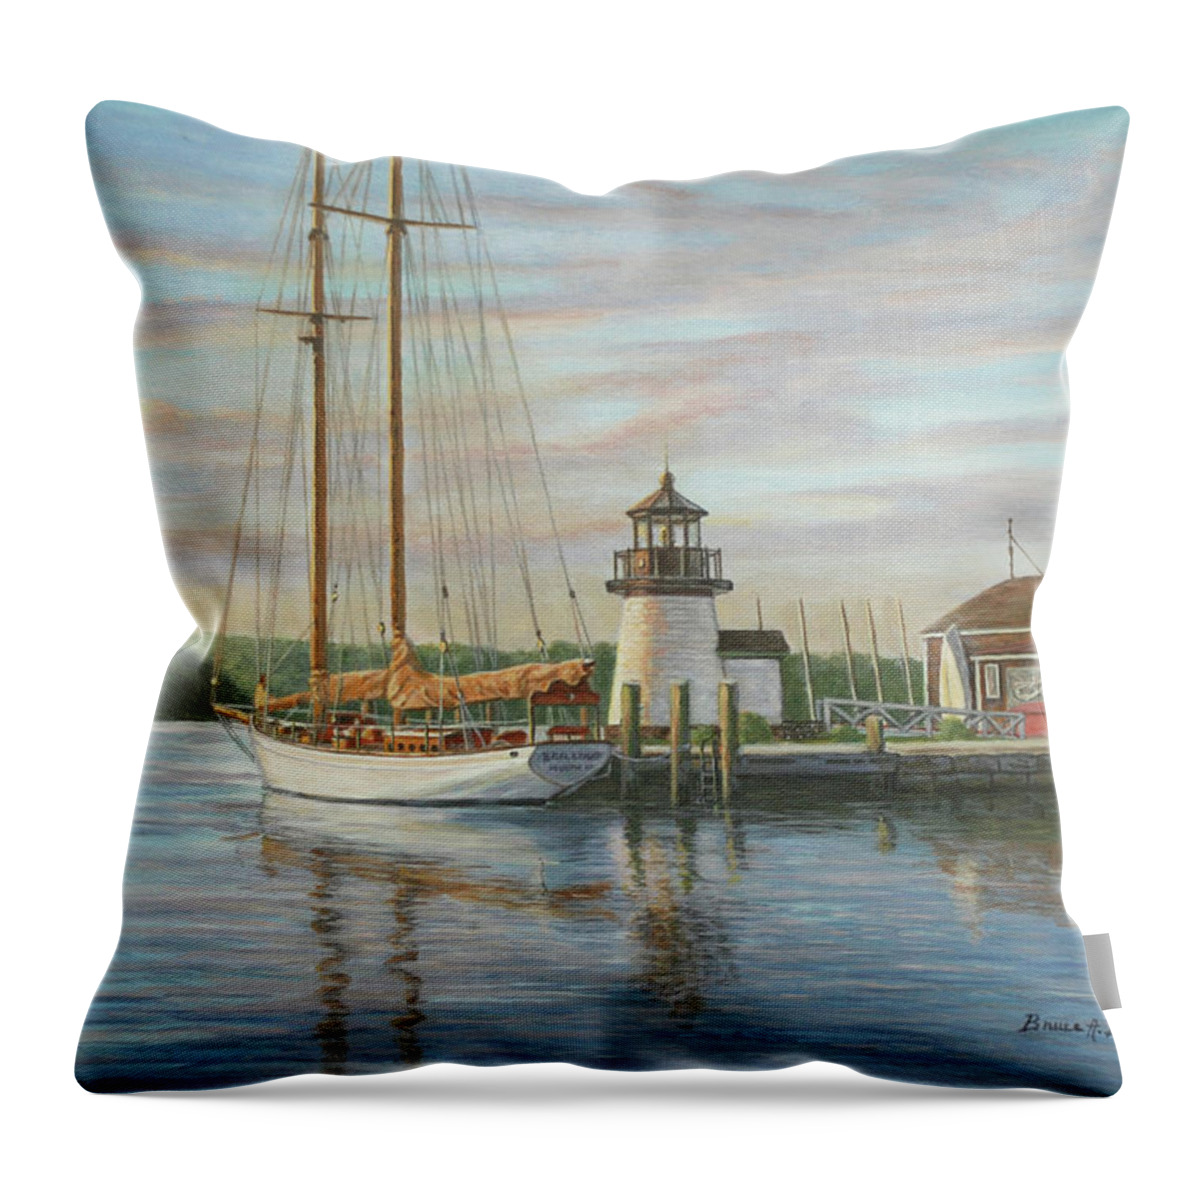 Marine Art Throw Pillow featuring the painting Mystic Dream by Bruce Dumas